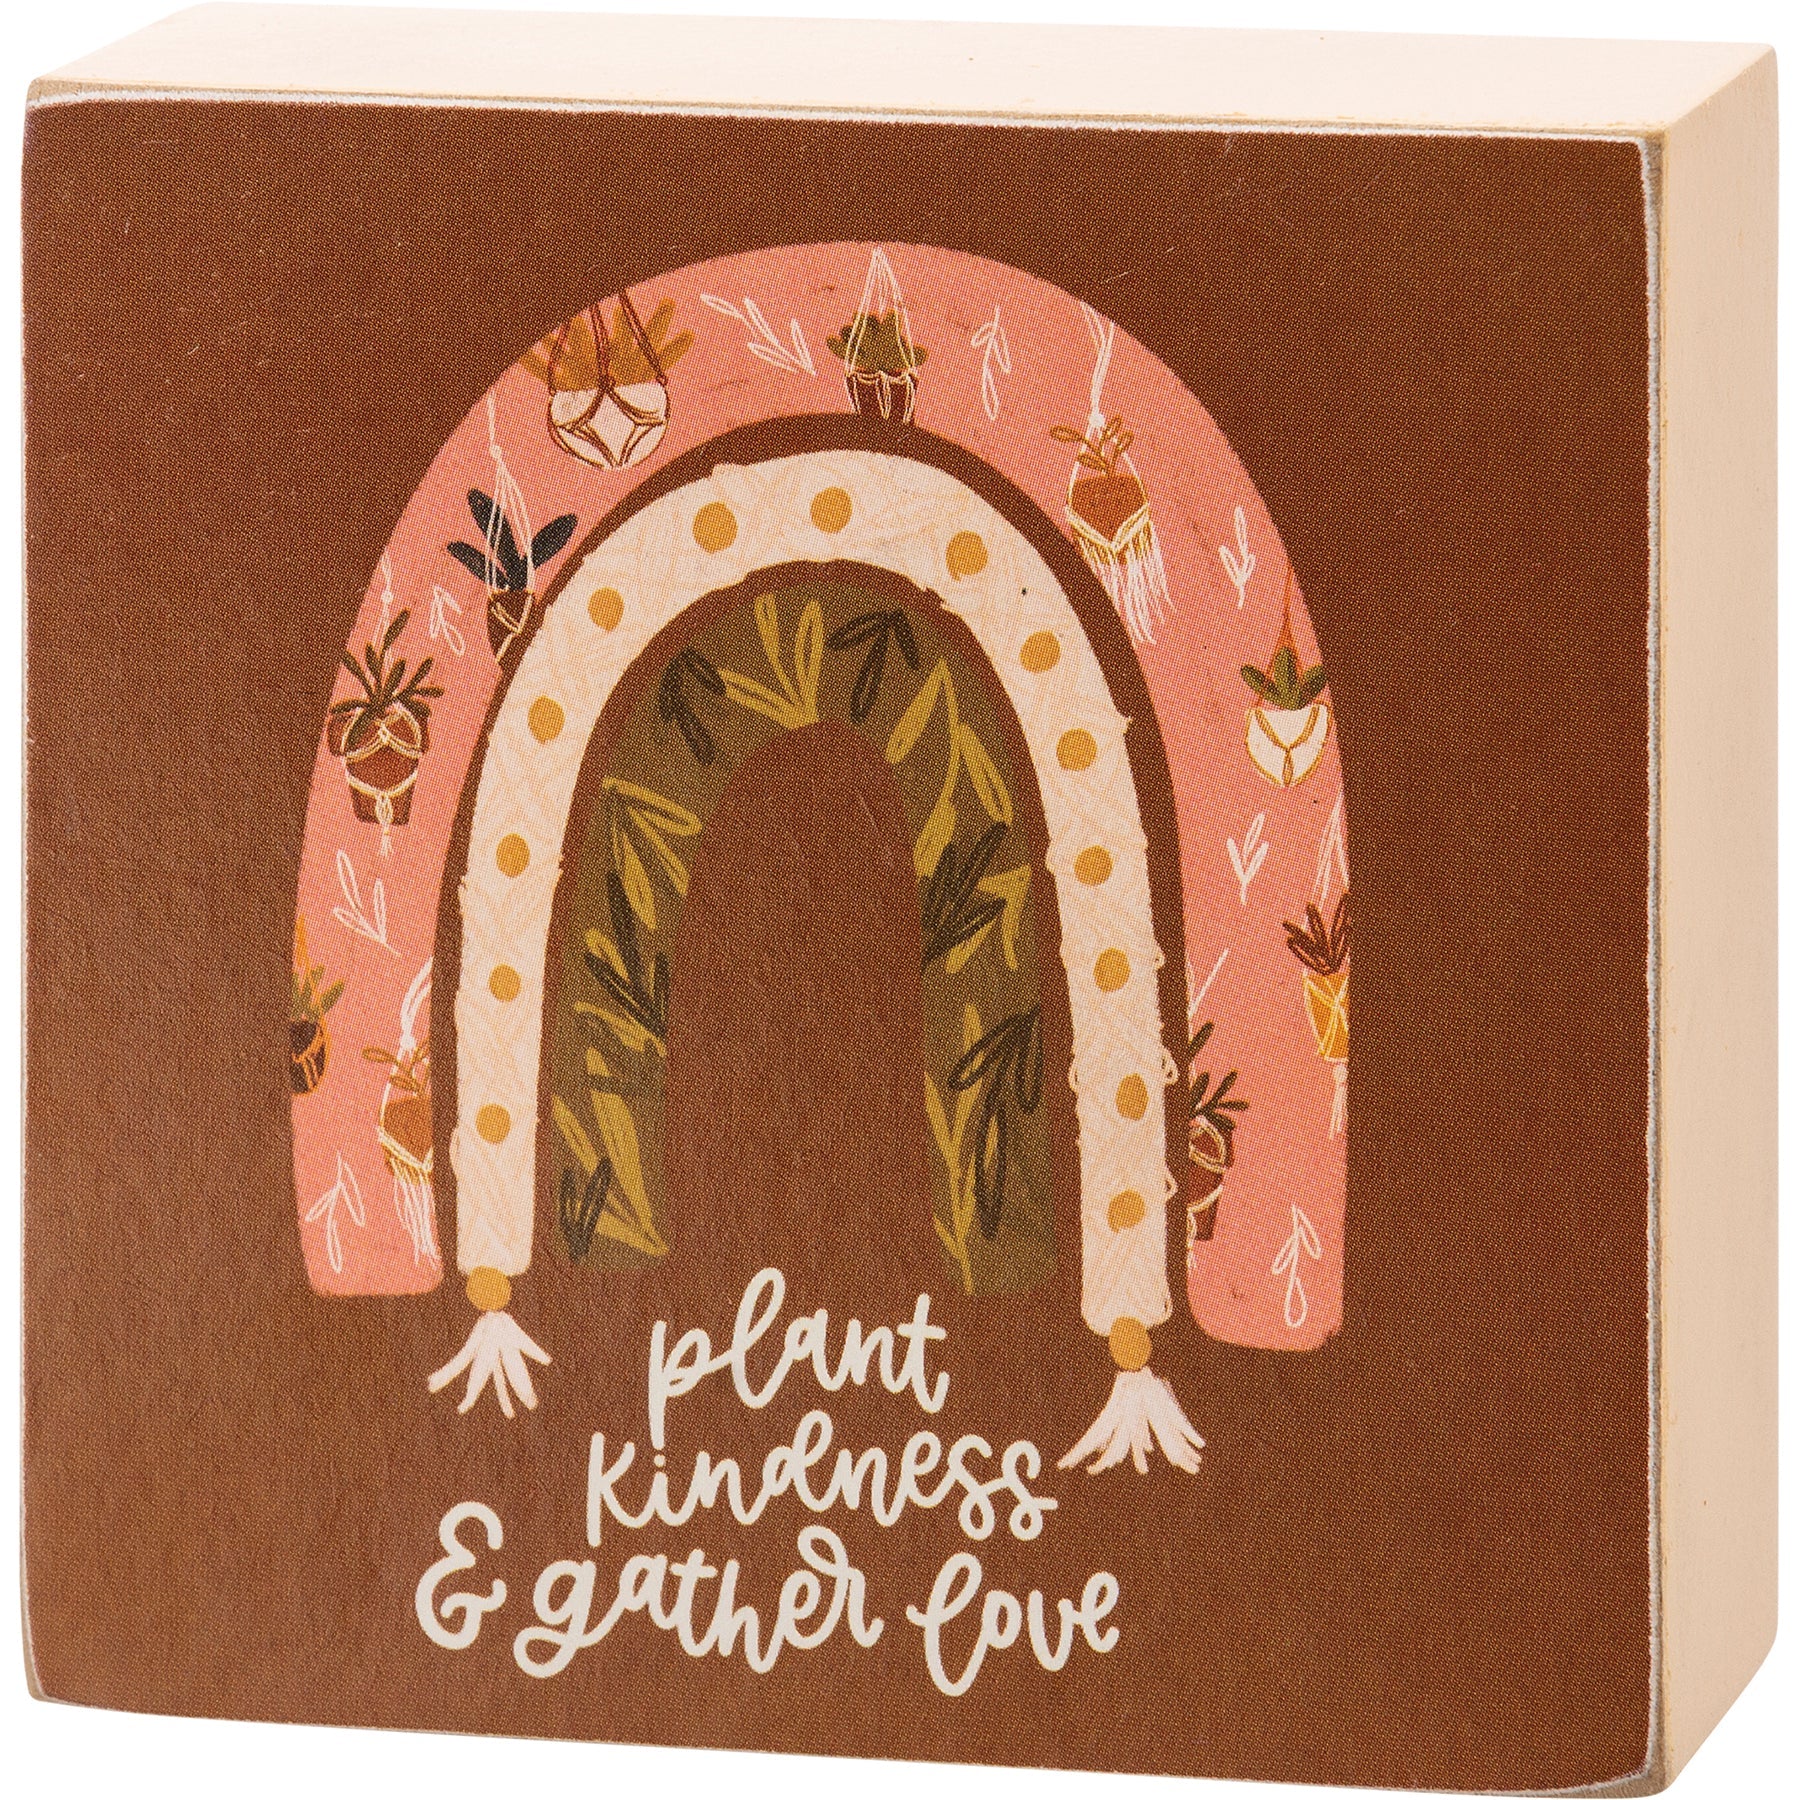 Plant Kindness & Gather Love Wooden Block Sign | 3" Square